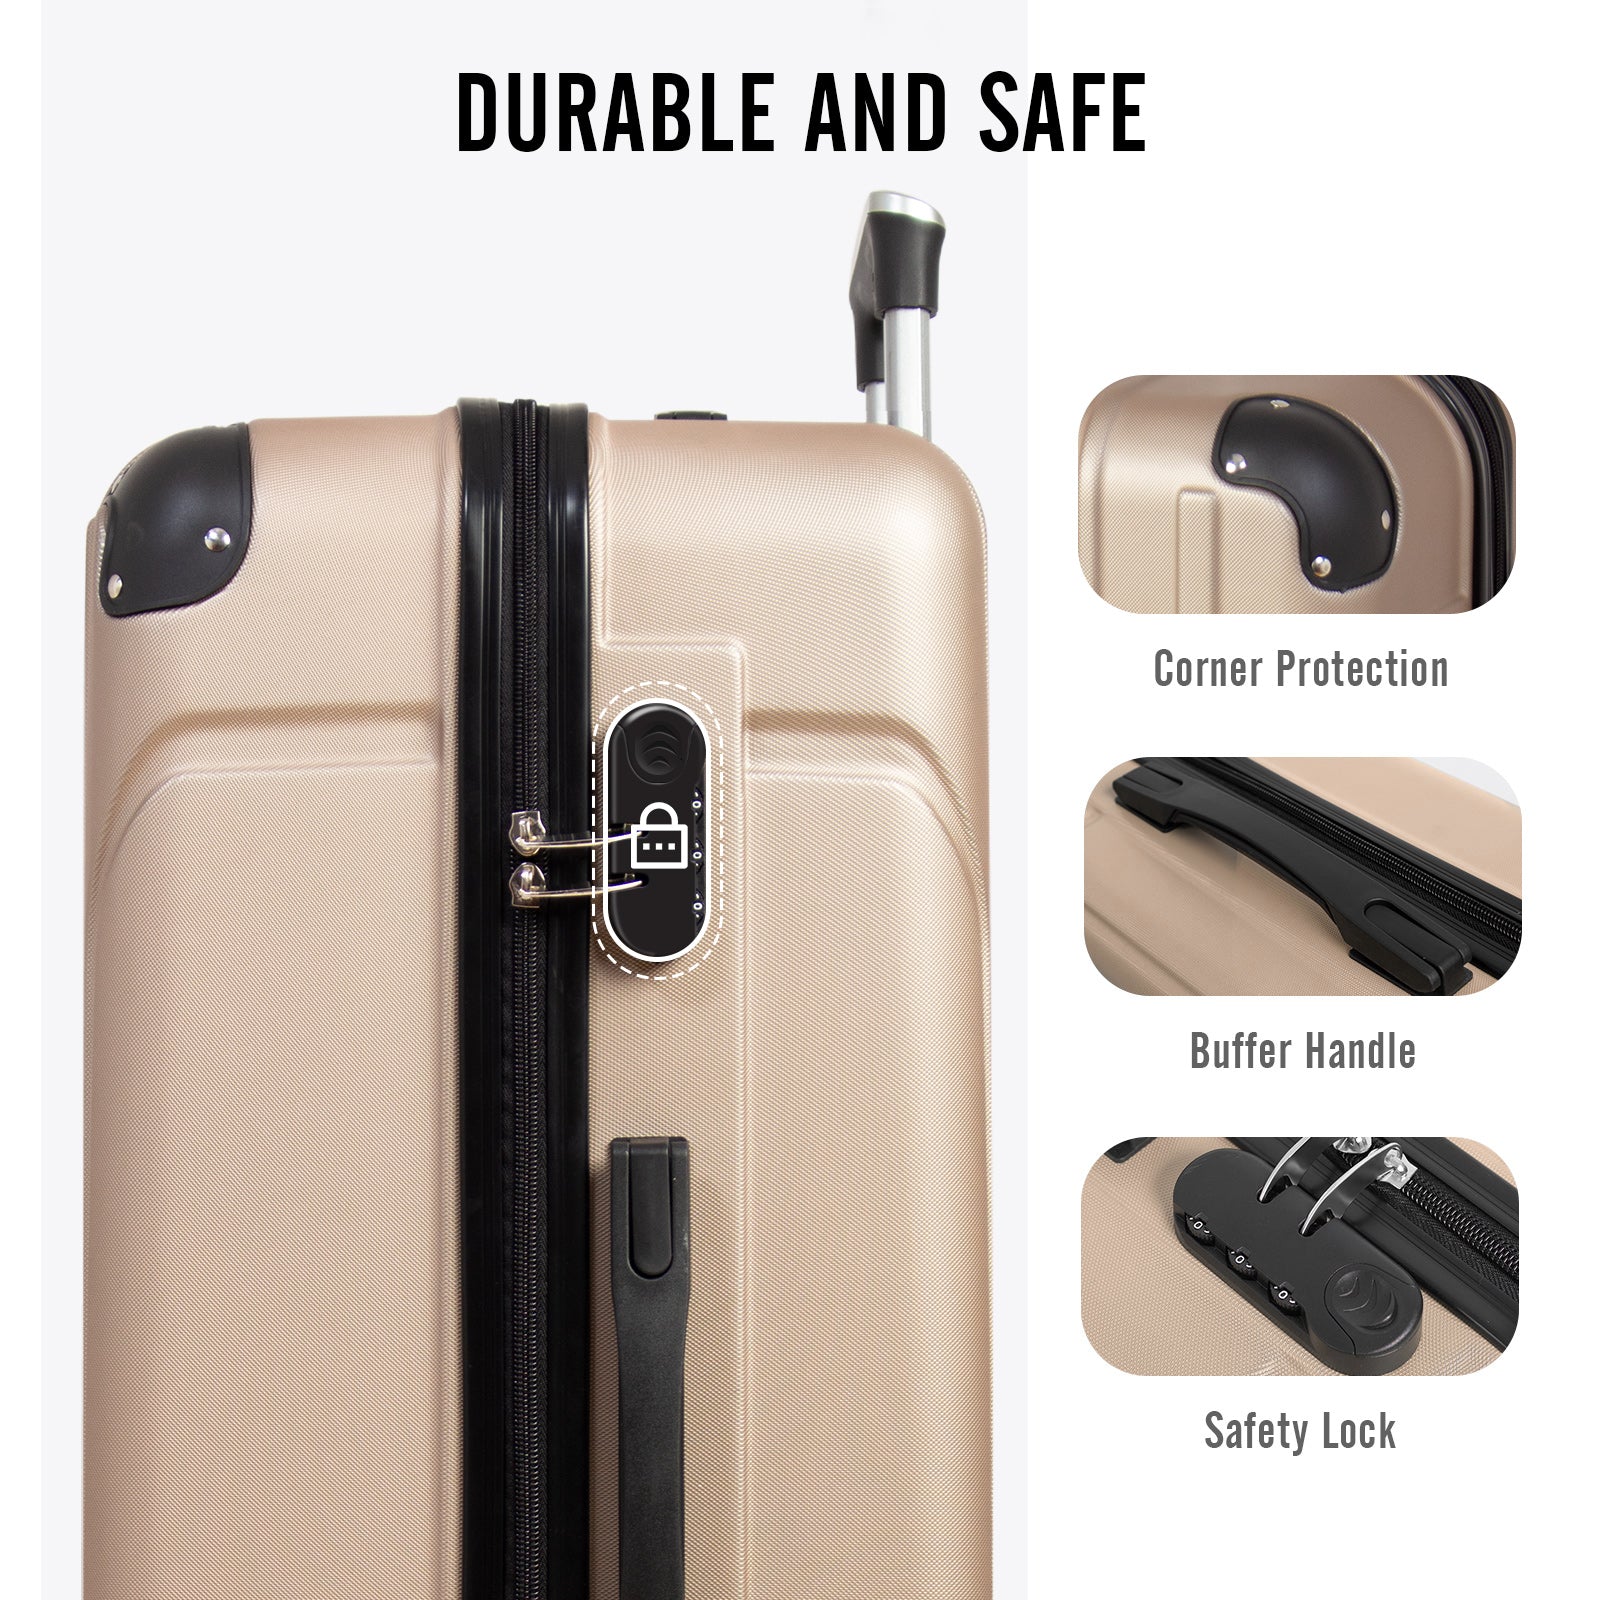 Todeco-Large-Size-Suitcase-78cm-Travel-Suitcase-Rigid-and-Lightweight-ABS-Travel-Suitcase-on-Wheels-Suitcases-4-Double-Wheels-78x51x28cm-Champagne-Large-Size-Suitcase-78cm-Champagne